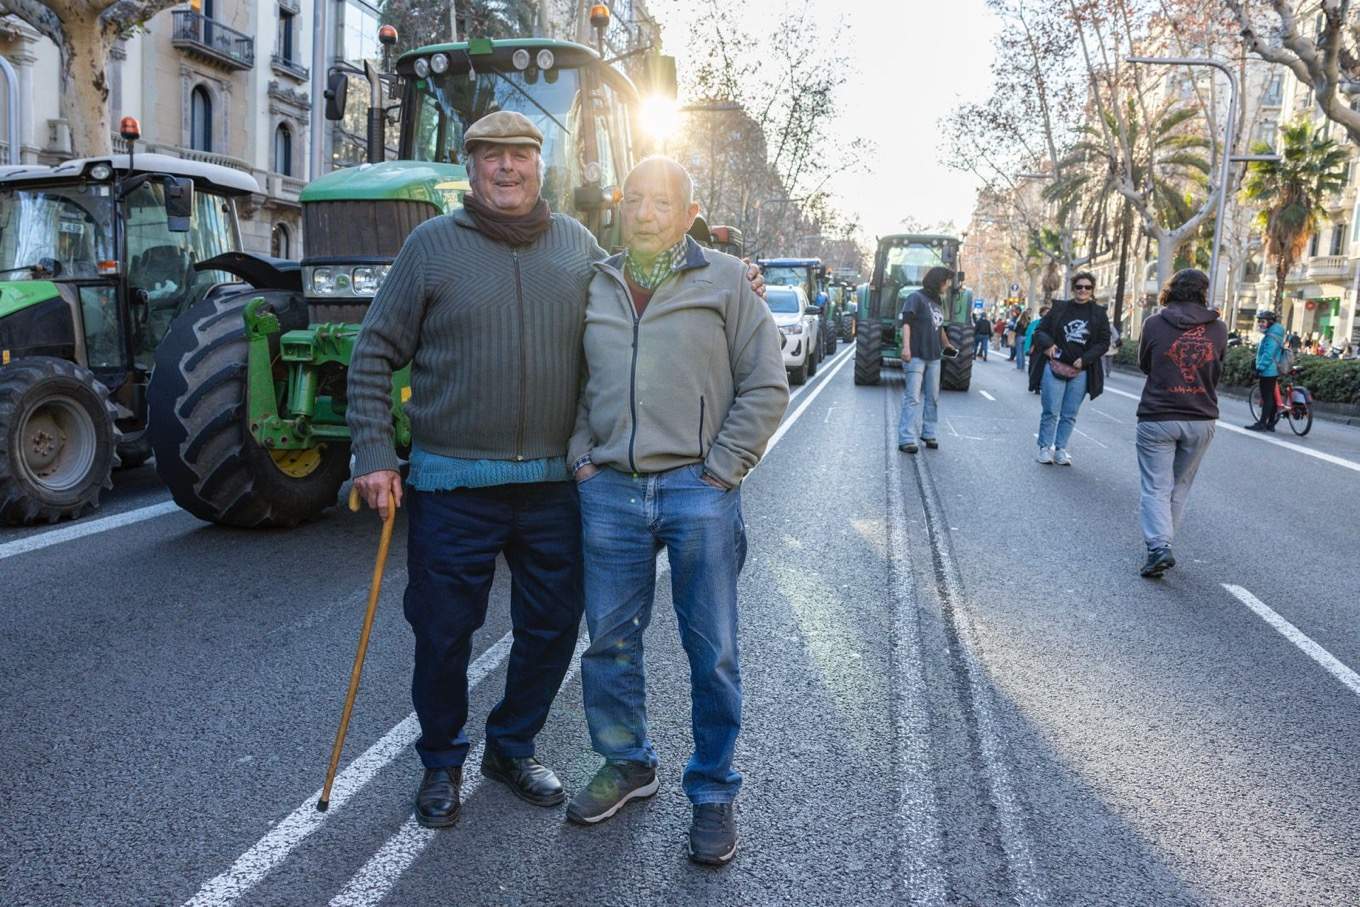 Catalan farmers bring their anger to Barcelona: "We suffer so that you in the city can eat"